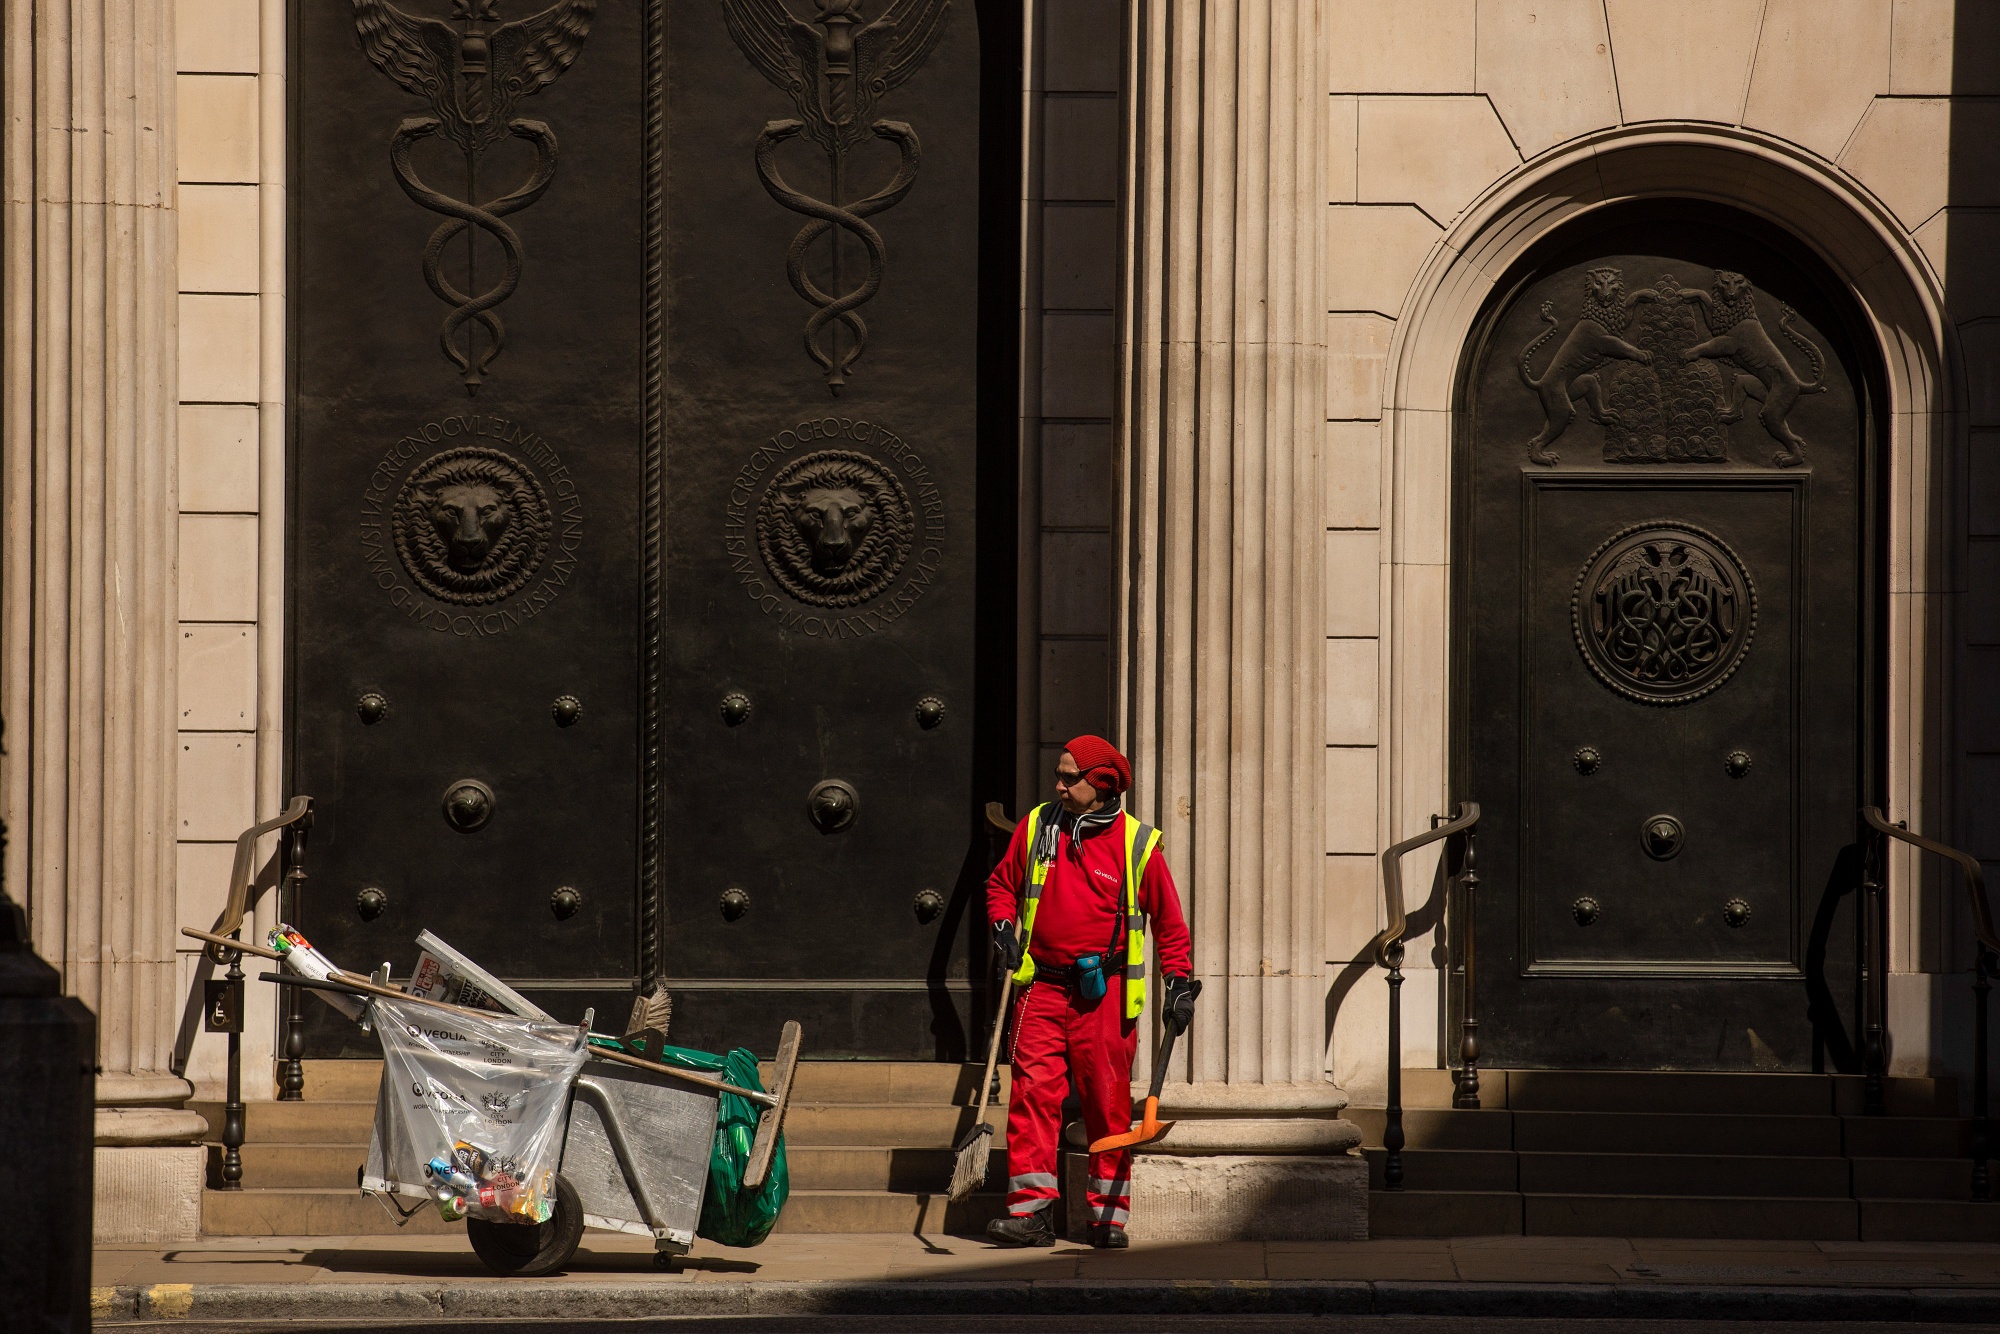 A municipal worker cleans the street outside the Bank of England in the City of London.